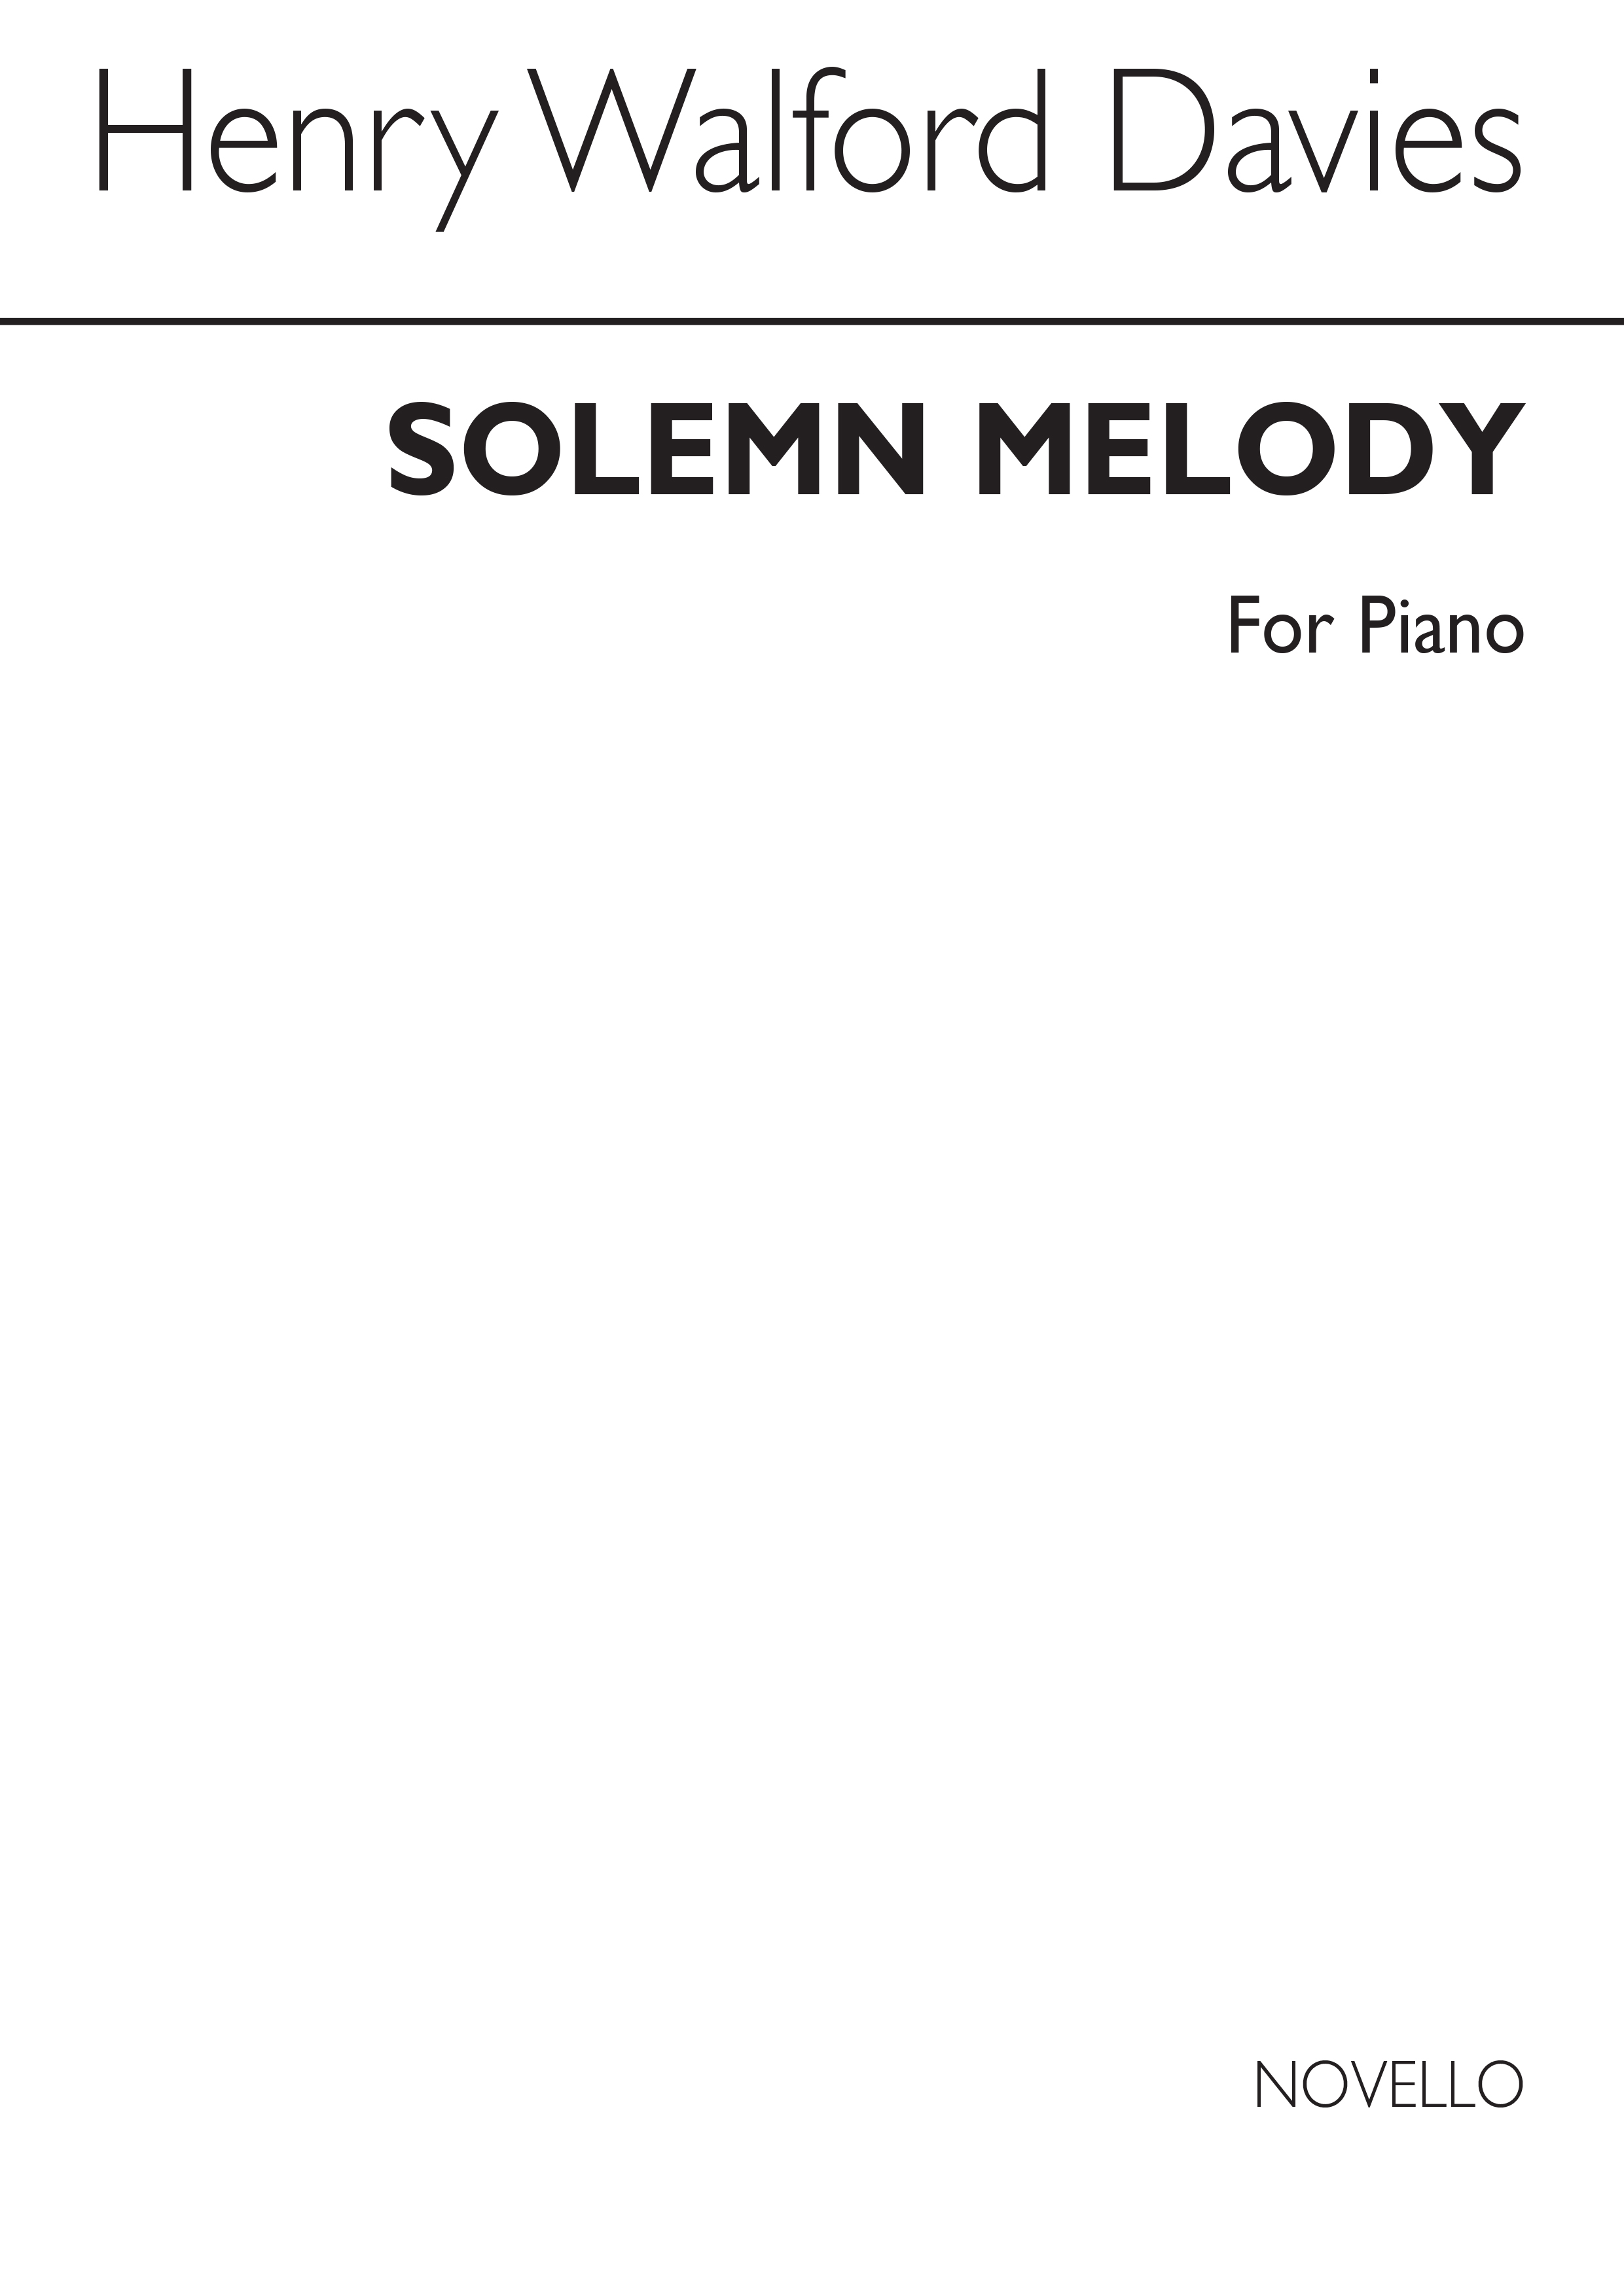 H. Walford Davies: Solemn Melody (Piano)